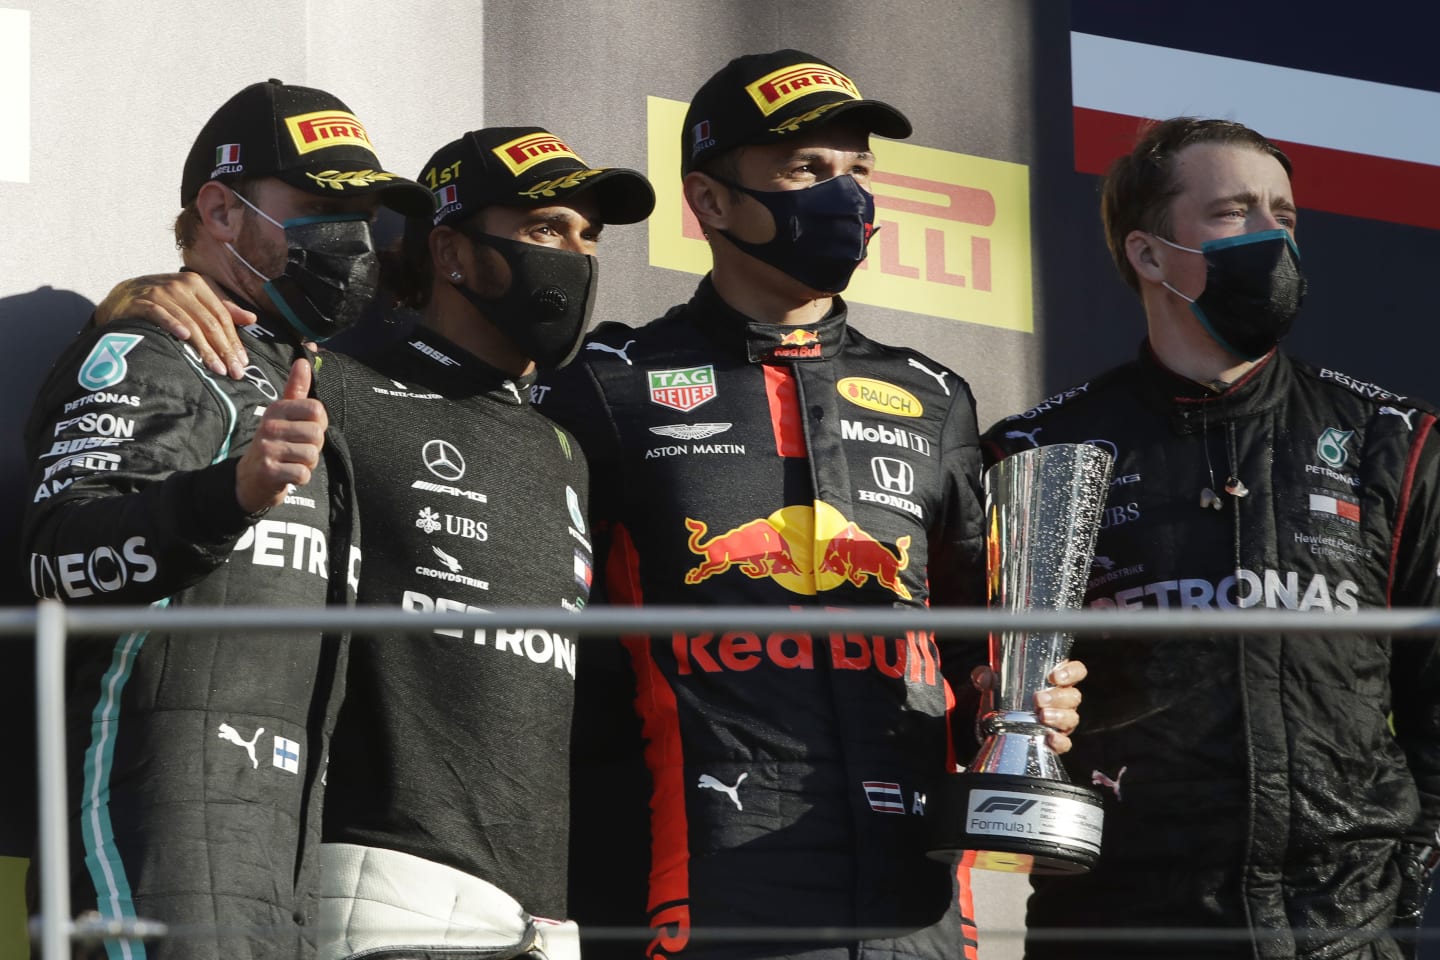 SCARPERIA, ITALY - SEPTEMBER 13: Race winner Lewis Hamilton of Great Britain and Mercedes GP, second placed Valtteri Bottas of Finland and Mercedes GP and third placed Alexander Albon of Thailand and Red Bull Racing celebrate on the podium during the F1 Grand Prix of Tuscany at Mugello Circuit on September 13, 2020 in Scarperia, Italy. (Photo by Luca Bruno - Pool/Getty Images)